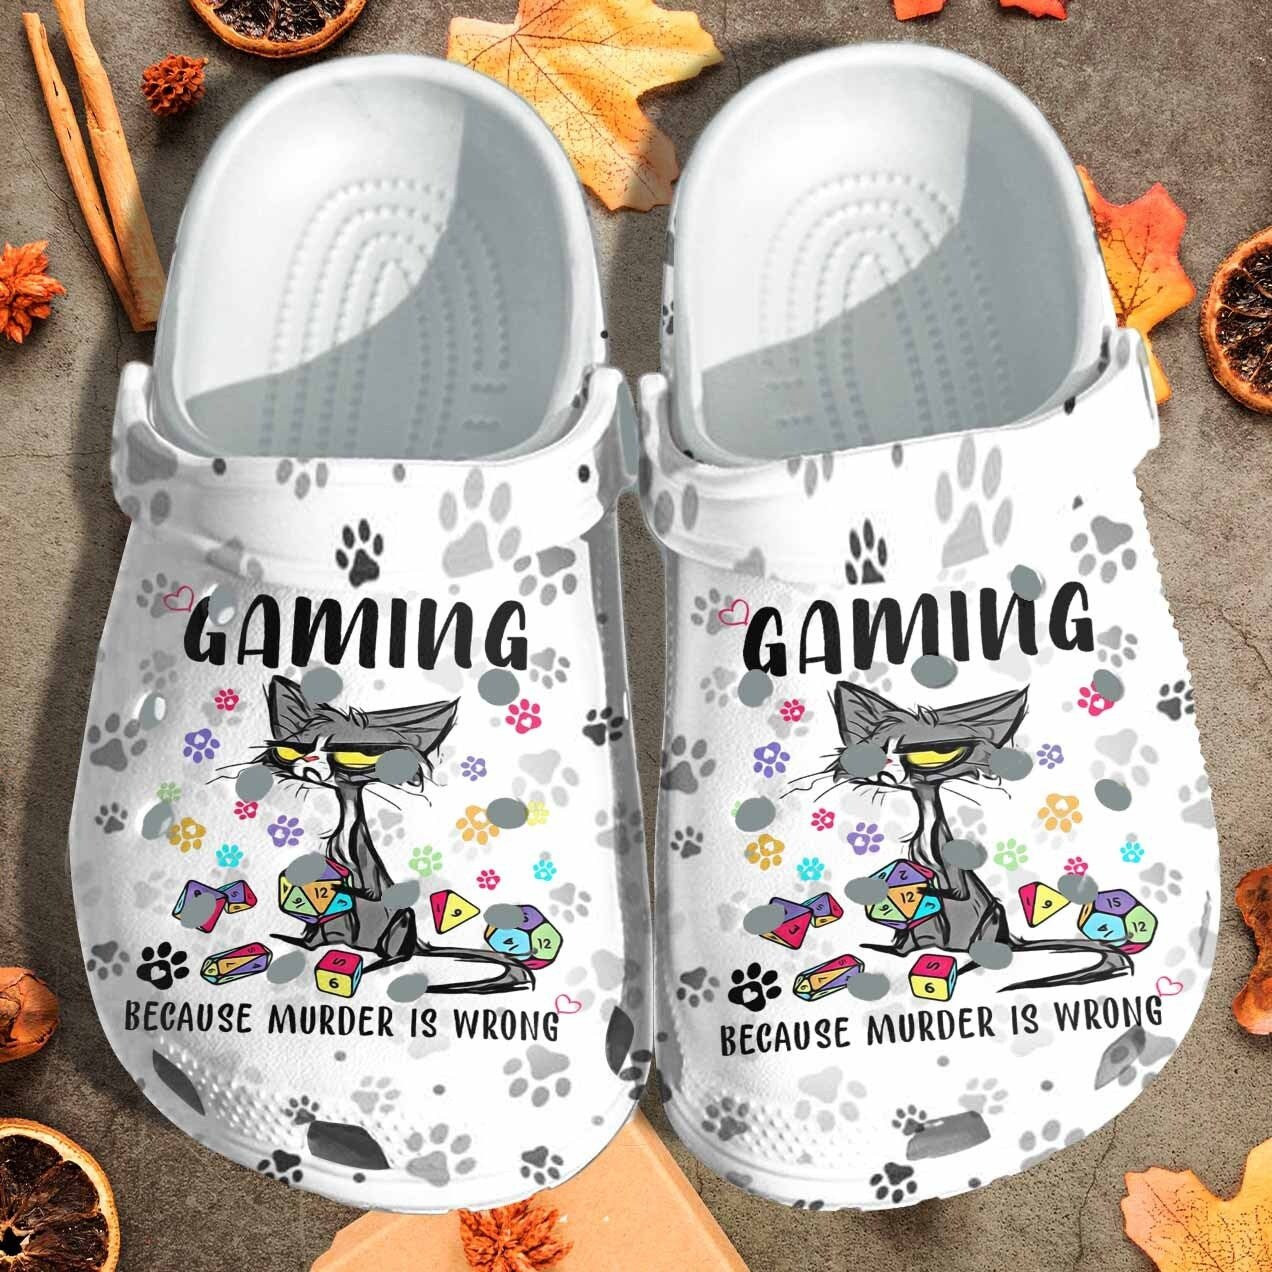 Grumpy Cat Custom Crocs Shoes Clogs - Gaming Because Murder Is Wrong Outdoor Crocs Shoes Clogs